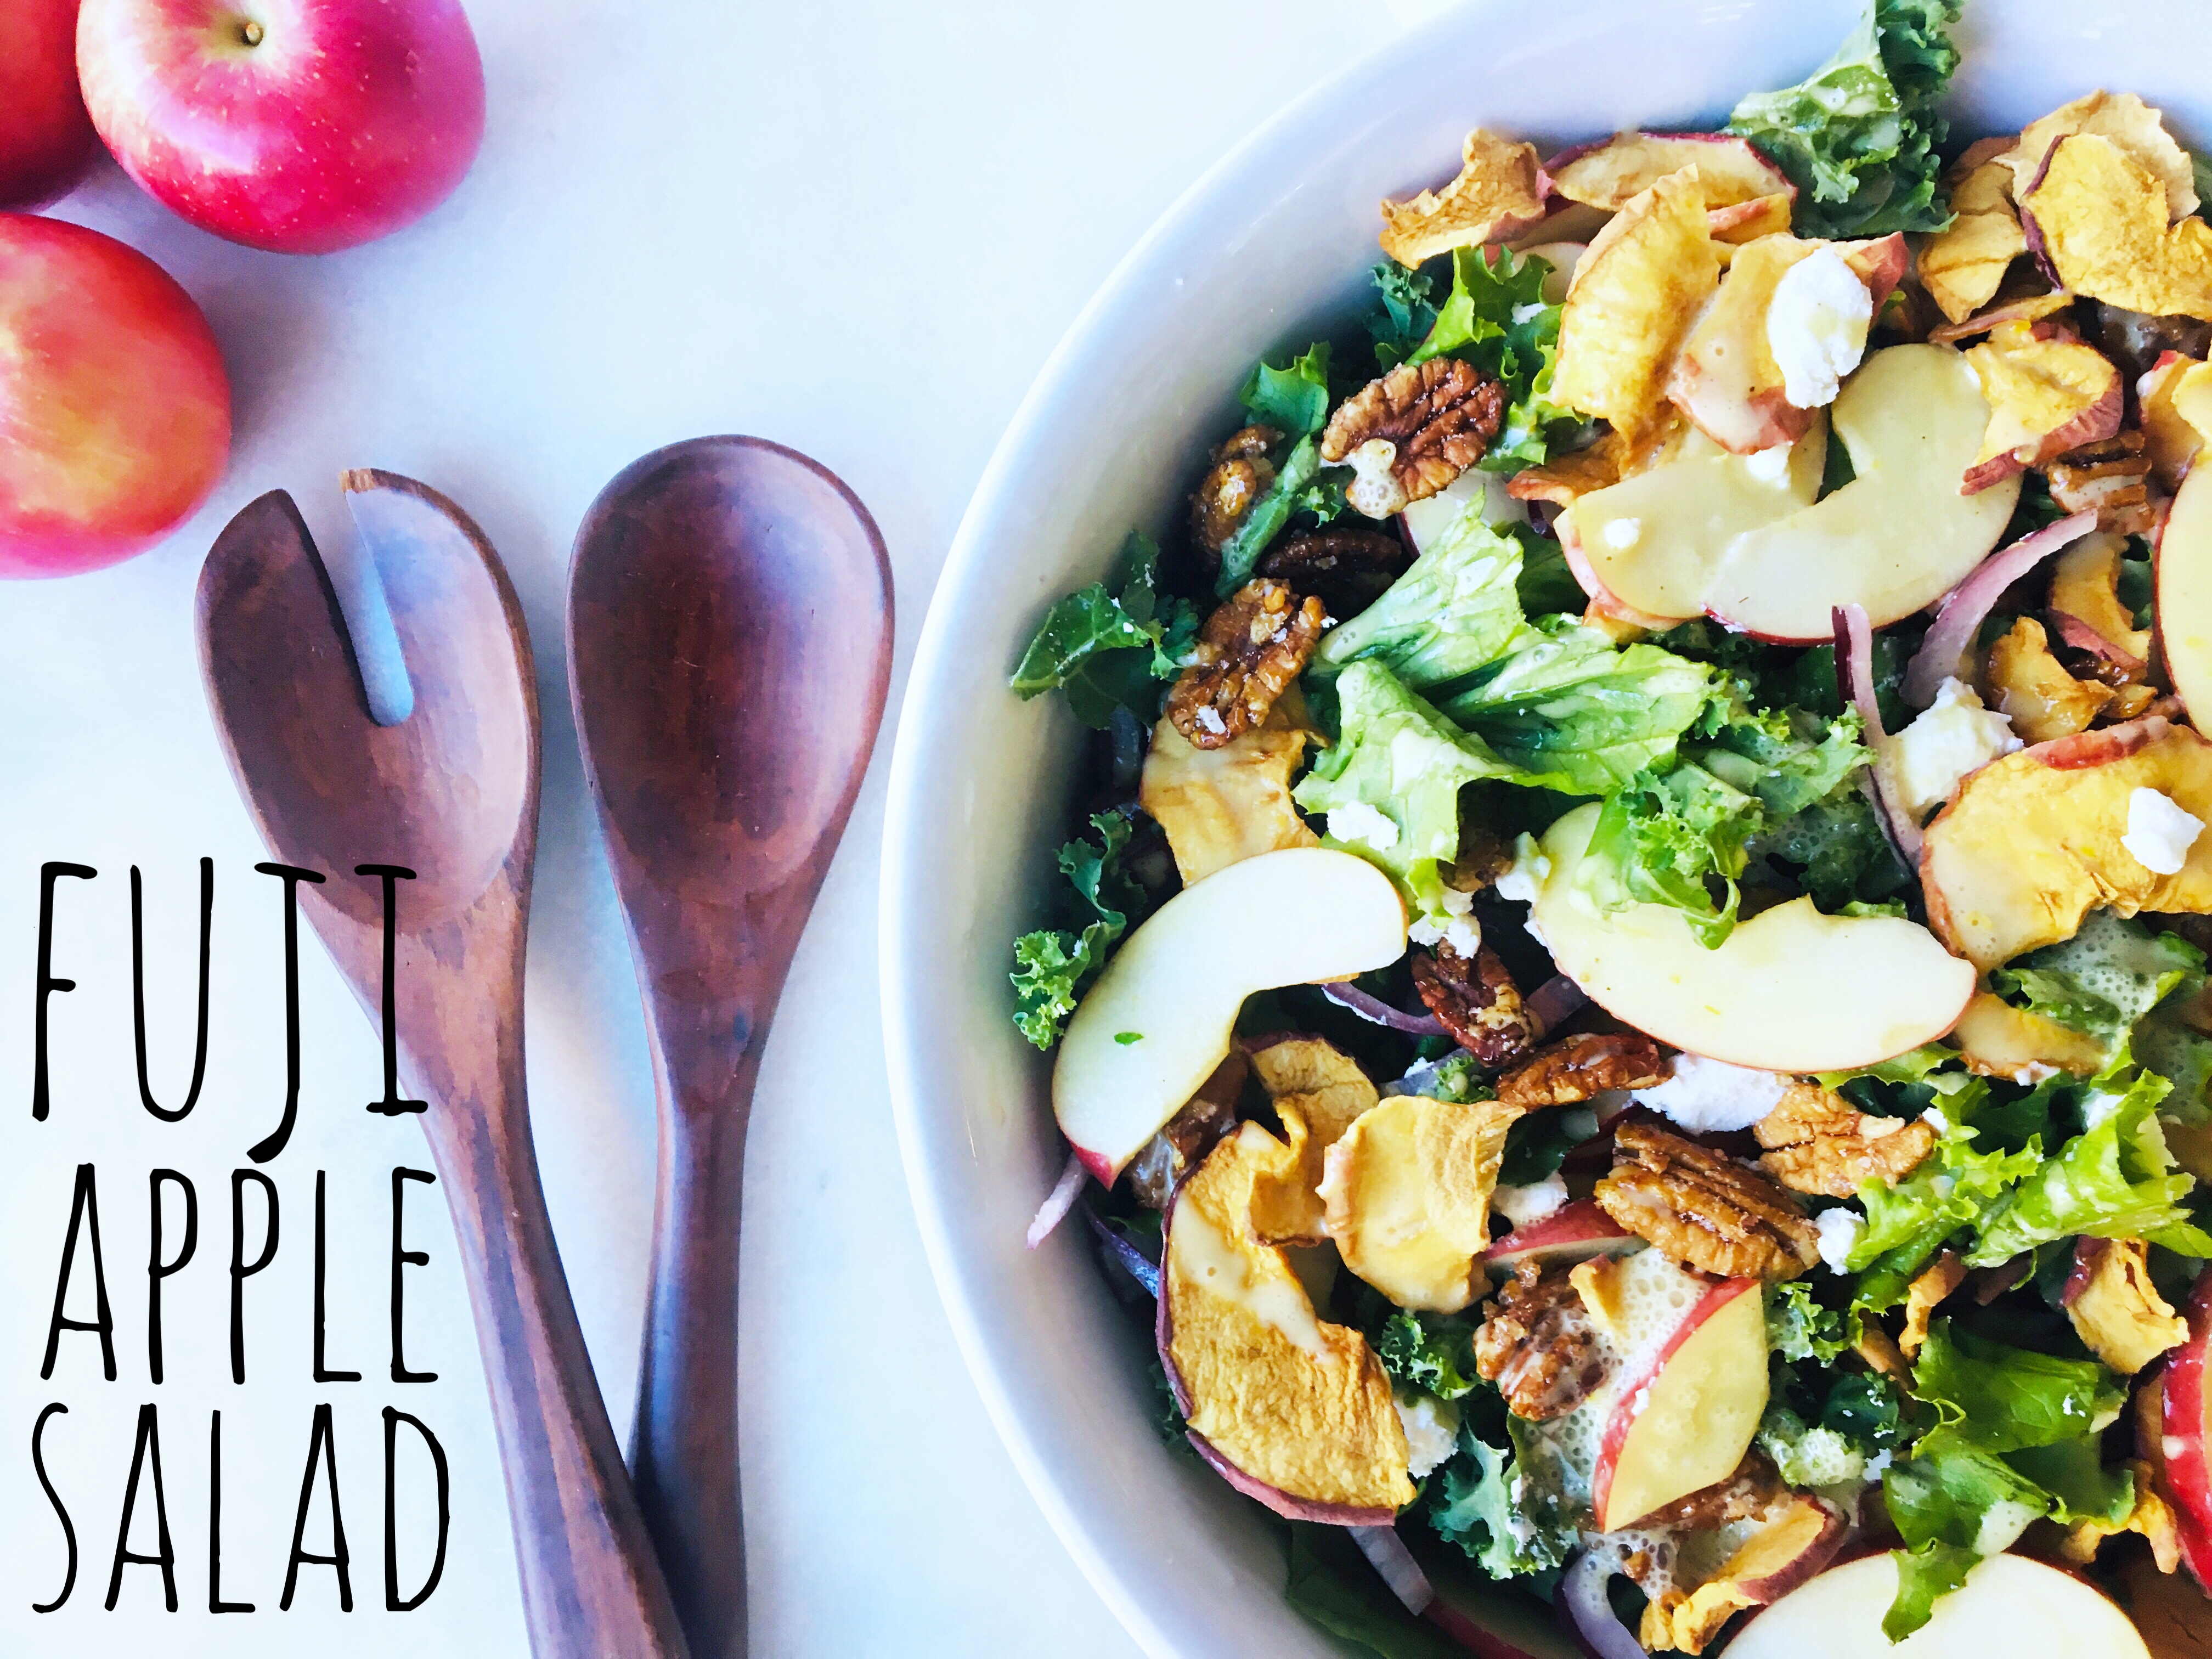 try our green salad tossed with fresh fuji apples, apple chips, toasted pecans, feta cheese and a Fuji Apple dressing